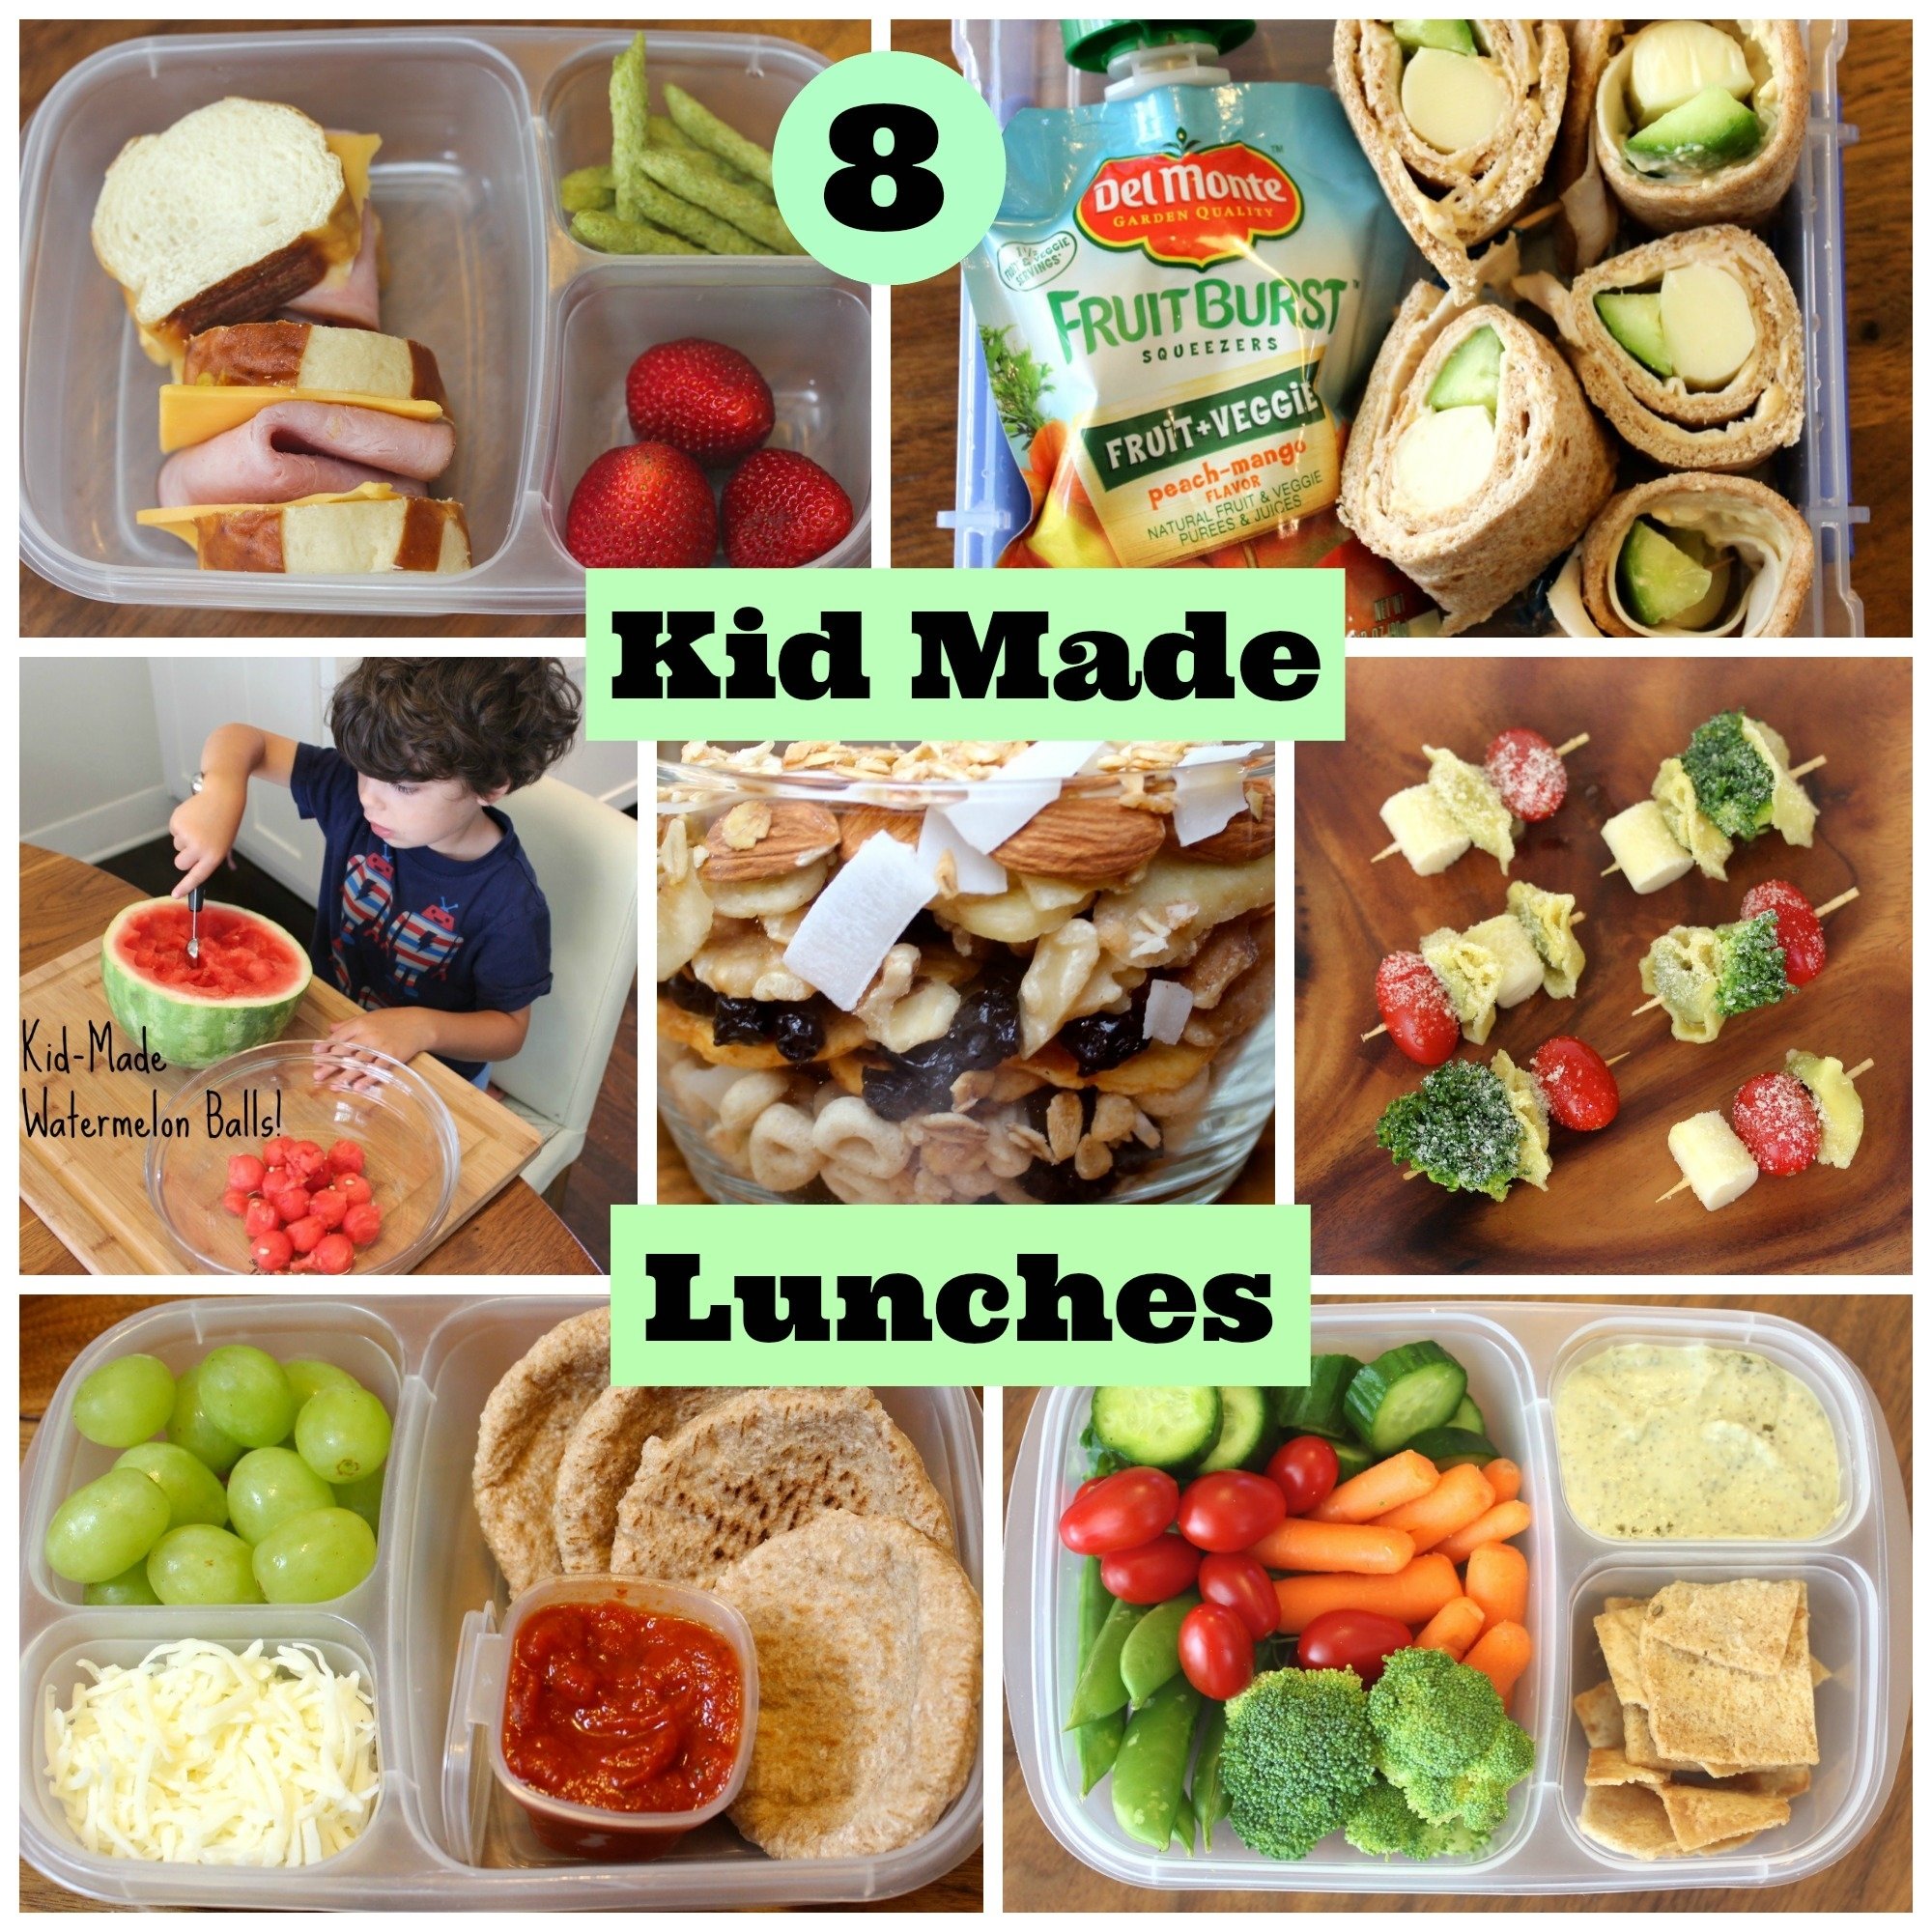 10 Nice Kid Lunch Ideas For School 4 healthy school lunches your kids can make themselves babble 6 2022